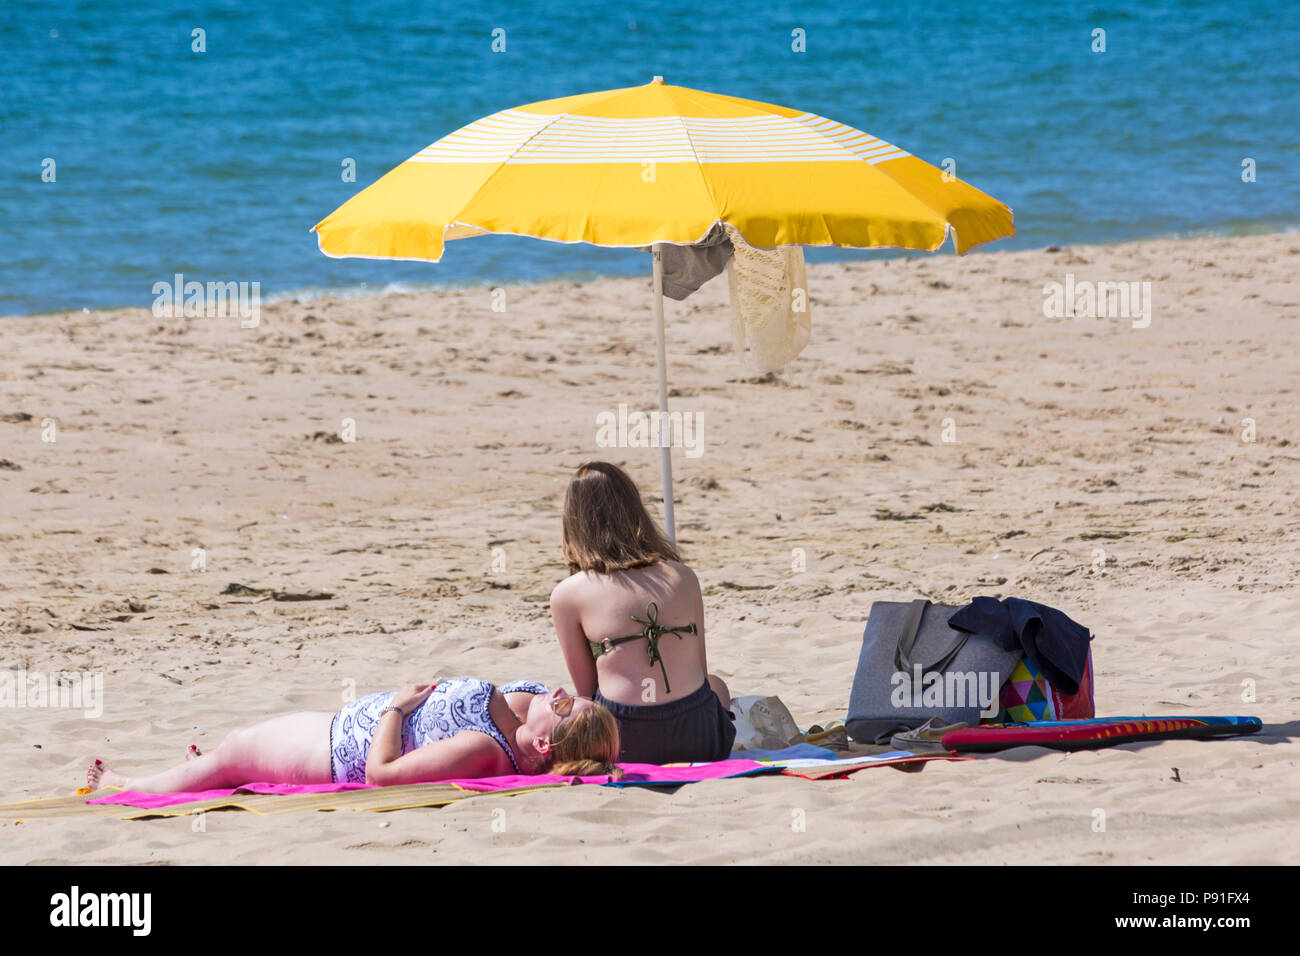 Bournemouth, Dorset, UK. 14th July 2018. UK weather: The heatwave continues with another hot sunny day, as sunseekers make the most of the glorious weather and head to the seaside at Bournemouth beaches. Women sunbathing on beach with yellow parasol. Credit: Carolyn Jenkins/Alamy Live News Stock Photo